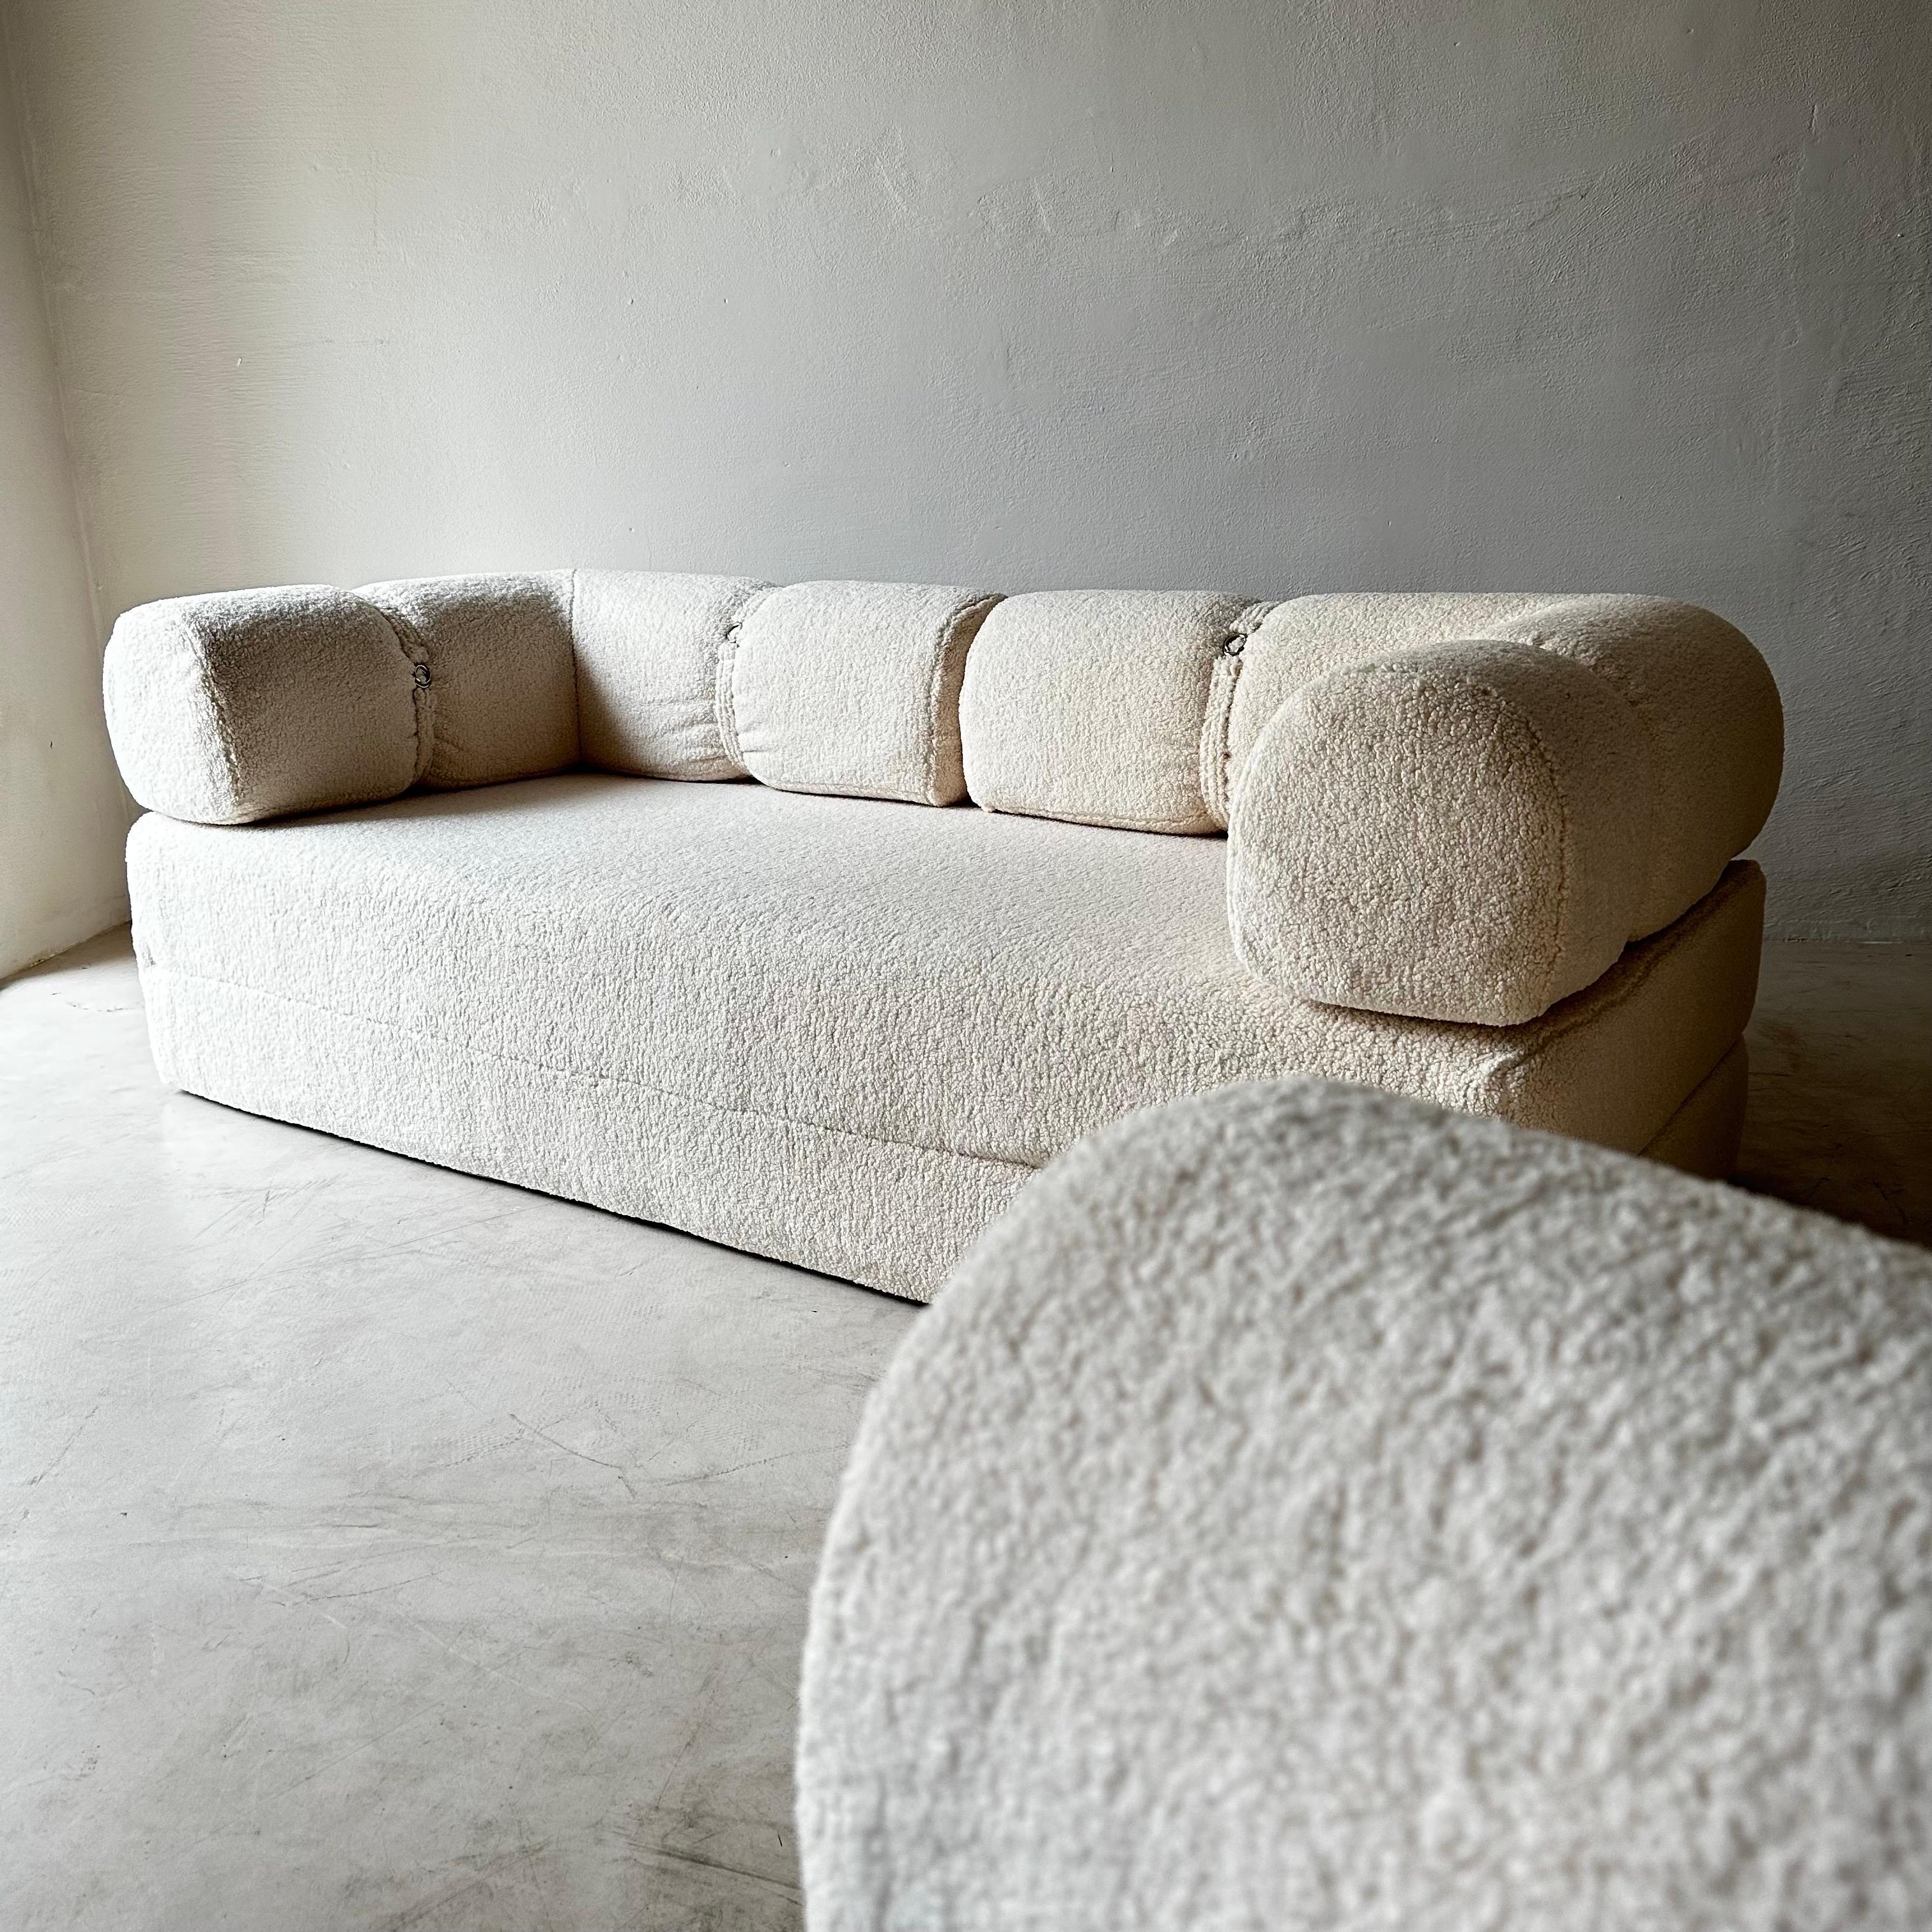 Faux Fur Mario Bellini Style Sofa's Daybeds Two Pieces Available, Italy, 1970s For Sale